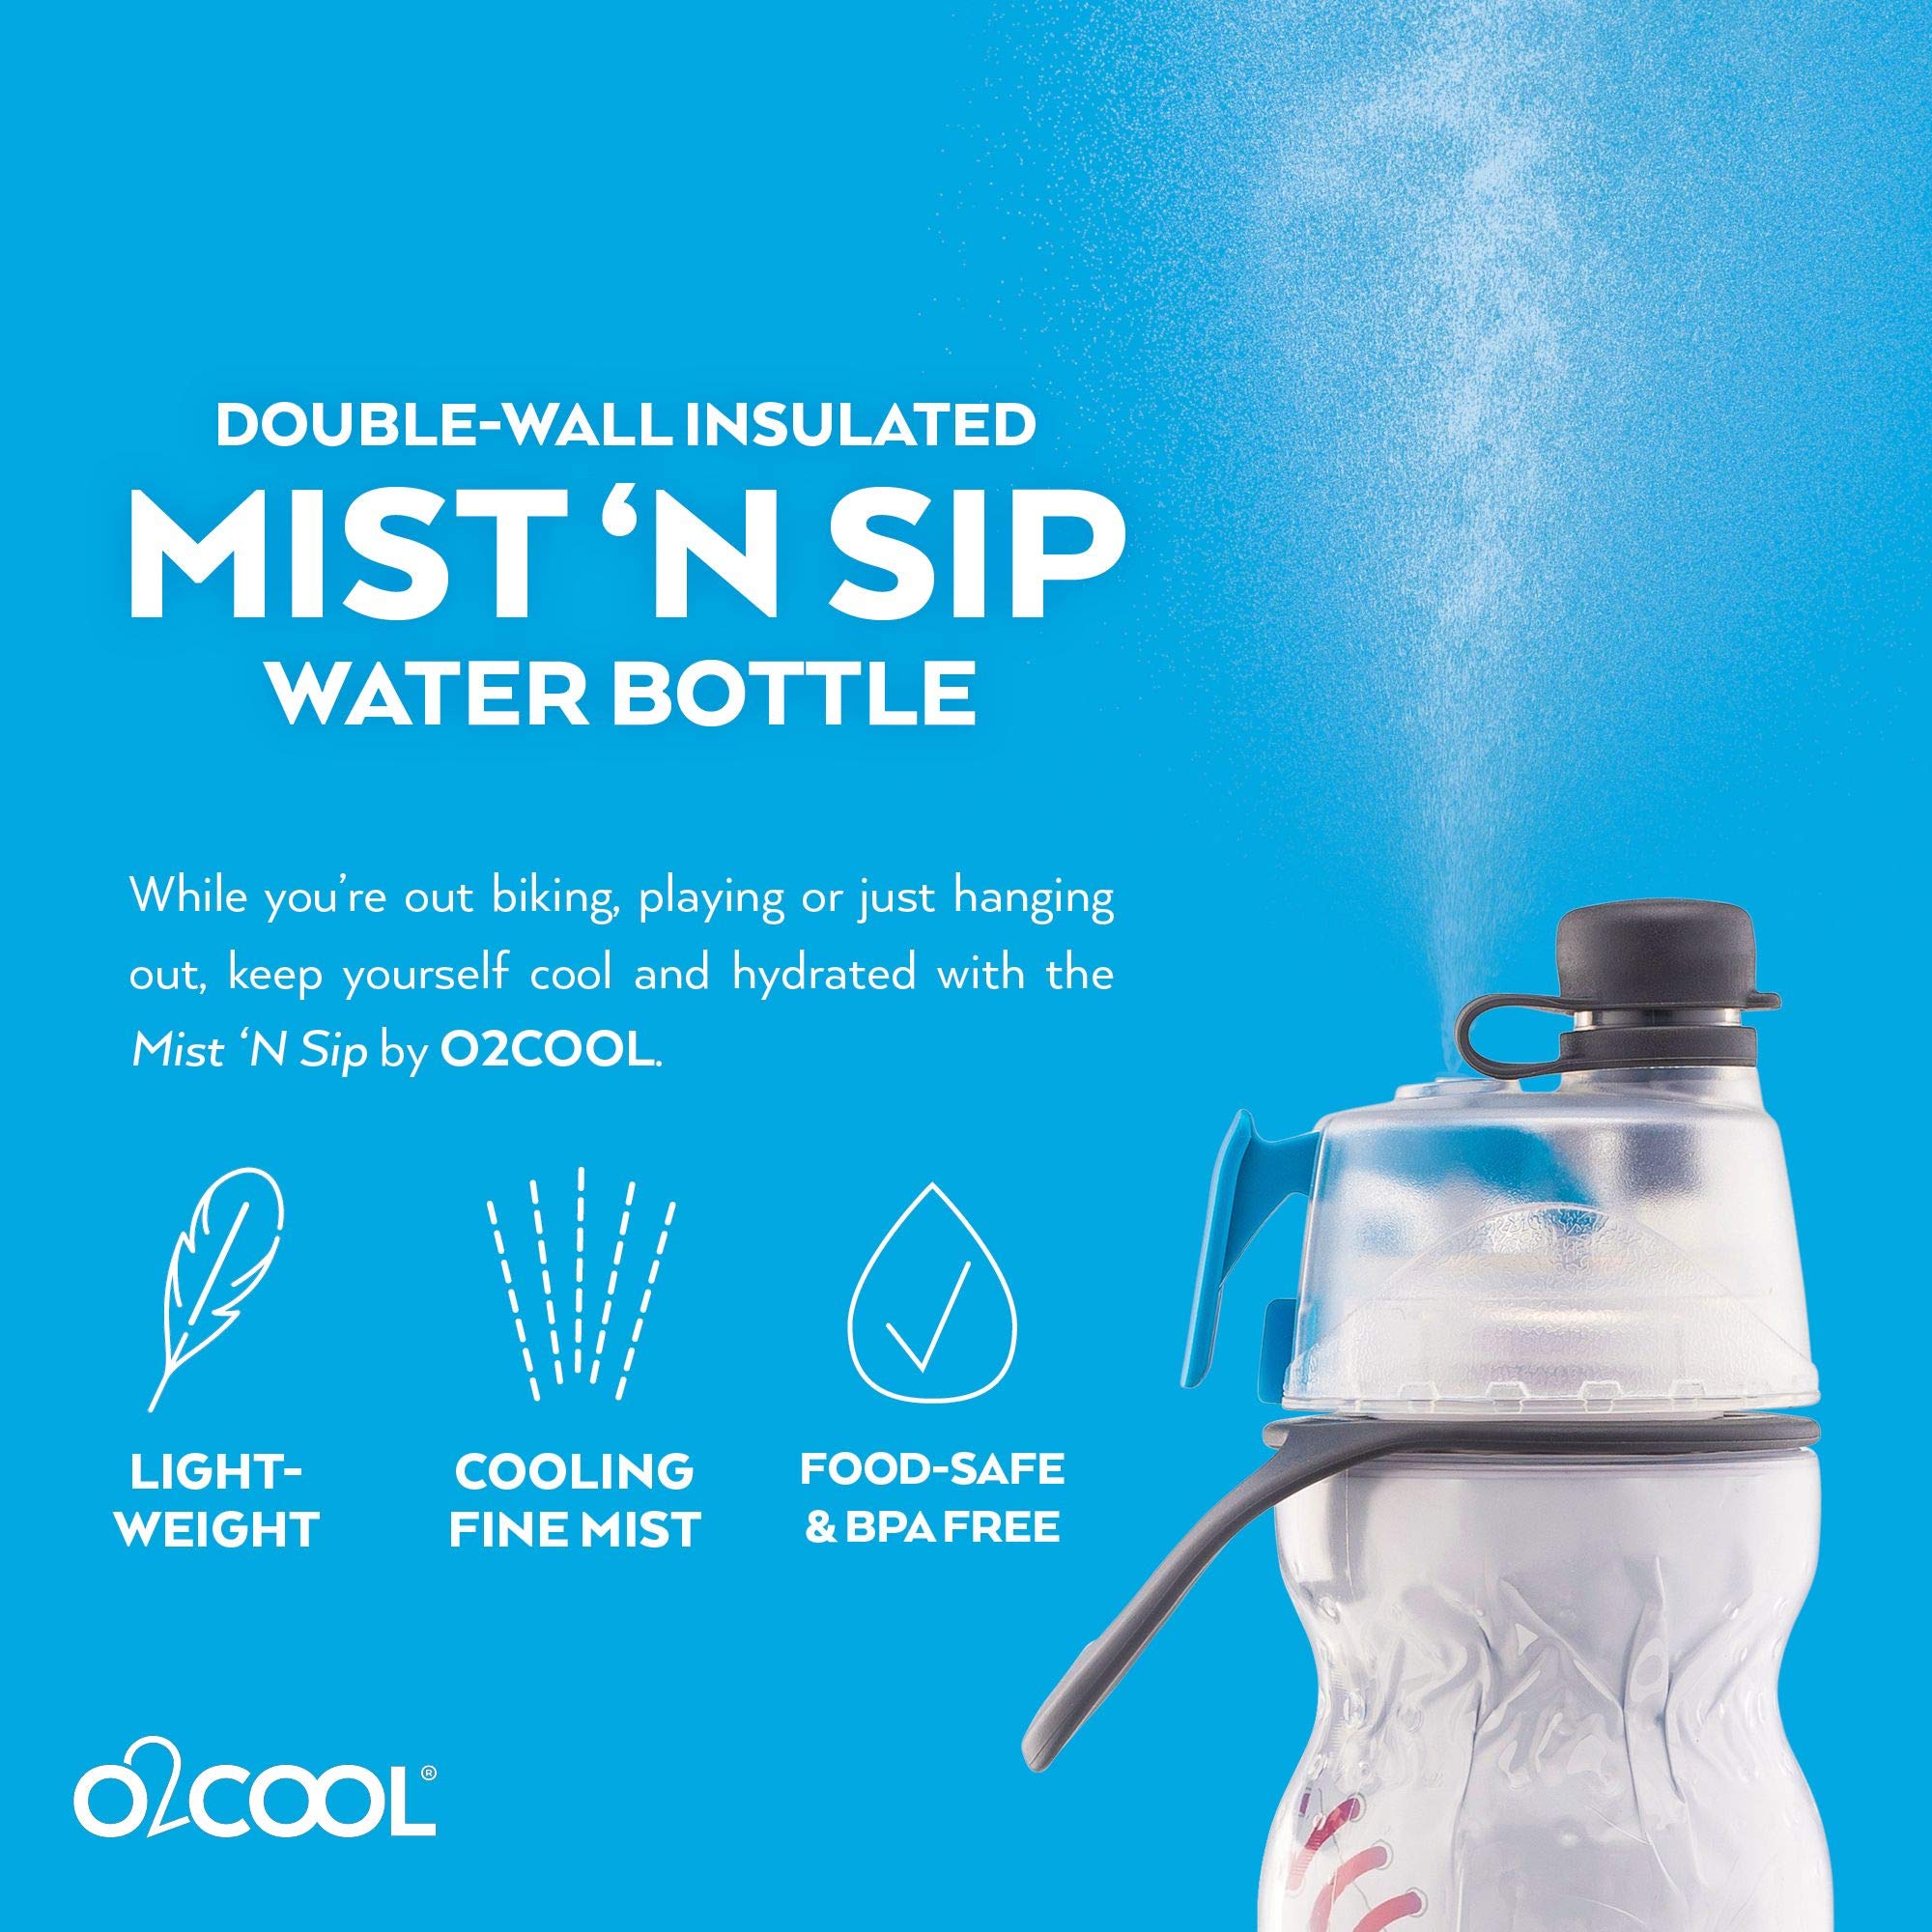 O2COOL Mist 'N Sip Misting Water Bottle 2-in-1 Function With No Leak Pull Top Spout Sports Reusable Water Bottle - 20 oz (2 Pack Baseball)